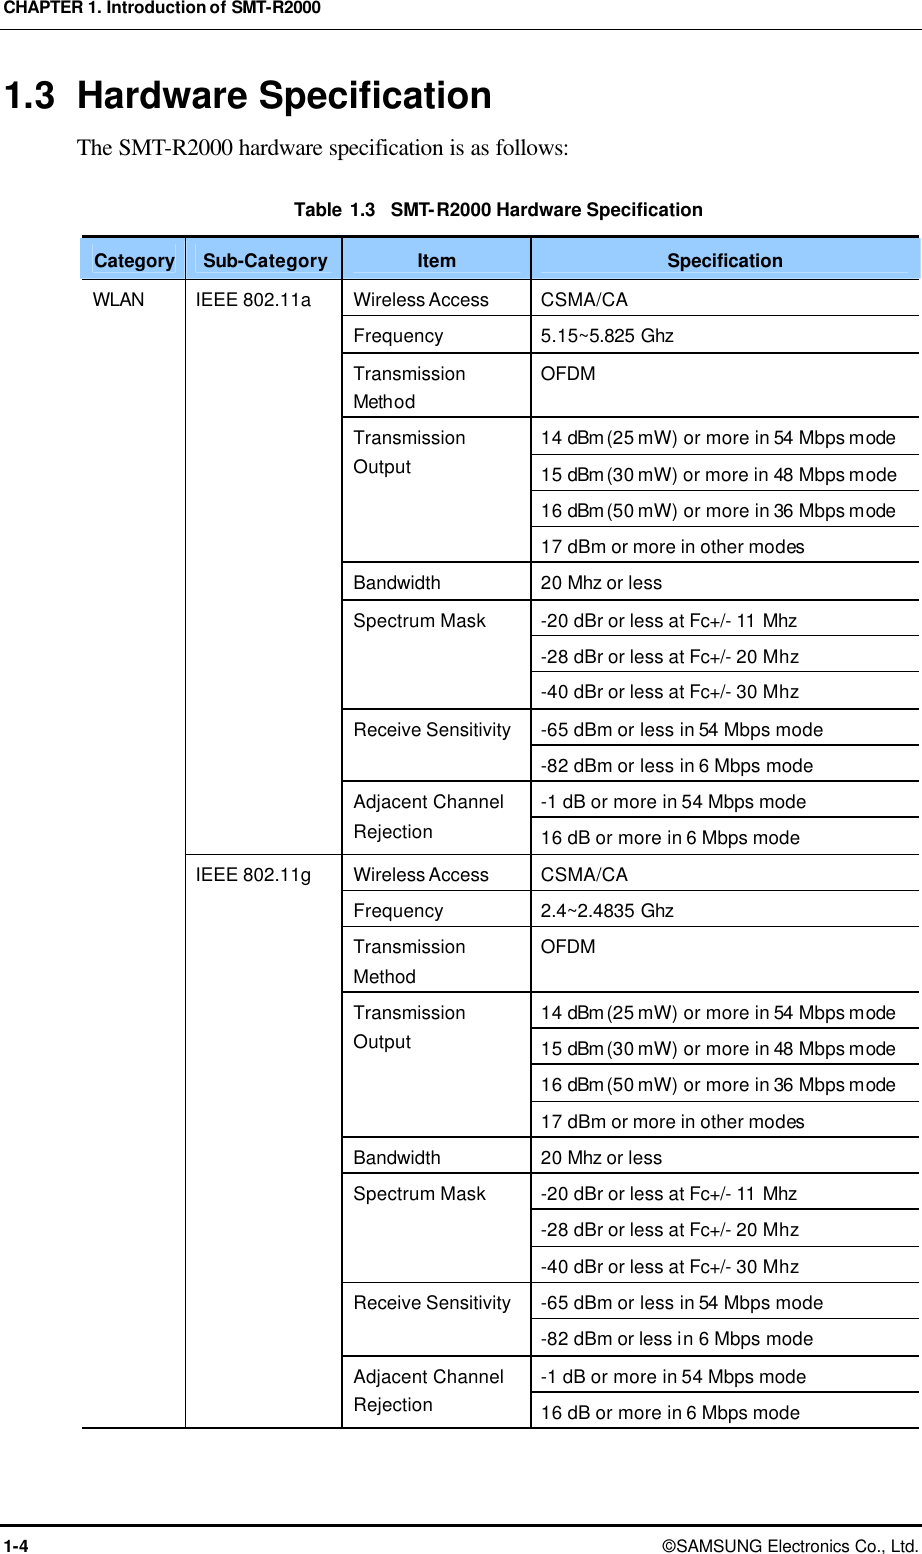 CHAPTER 1. Introduction of SMT-R2000 1-4 © SAMSUNG Electronics Co., Ltd. 1.3 Hardware Specification The SMT-R2000 hardware specification is as follows:    Table 1.3  SMT-R2000 Hardware Specification Category Sub-Category Item Specification Wireless Access CSMA/CA Frequency 5.15~5.825 Ghz   Transmission Method OFDM 14 dBm (25 mW) or more in 54 Mbps mode 15 dBm (30 mW) or more in 48 Mbps mode  16 dBm (50 mW) or more in 36 Mbps mode Transmission Output 17 dBm or more in other modes Bandwidth 20 Mhz or less -20 dBr or less at Fc+/- 11 Mhz -28 dBr or less at Fc+/- 20 Mhz Spectrum Mask -40 dBr or less at Fc+/- 30 Mhz -65 dBm or less in 54 Mbps mode   Receive Sensitivity -82 dBm or less in 6 Mbps mode   -1 dB or more in 54 Mbps mode IEEE 802.11a Adjacent Channel Rejection 16 dB or more in 6 Mbps mode Wireless Access CSMA/CA Frequency 2.4~2.4835 Ghz   Transmission Method OFDM 14 dBm (25 mW) or more in 54 Mbps mode 15 dBm (30 mW) or more in 48 Mbps mode 16 dBm (50 mW) or more in 36 Mbps mode Transmission Output 17 dBm or more in other modes   Bandwidth 20 Mhz or less -20 dBr or less at Fc+/- 11 Mhz -28 dBr or less at Fc+/- 20 Mhz Spectrum Mask -40 dBr or less at Fc+/- 30 Mhz -65 dBm or less in 54 Mbps mode   Receive Sensitivity -82 dBm or less in 6 Mbps mode   -1 dB or more in 54 Mbps mode WLAN IEEE 802.11g Adjacent Channel Rejection 16 dB or more in 6 Mbps mode 